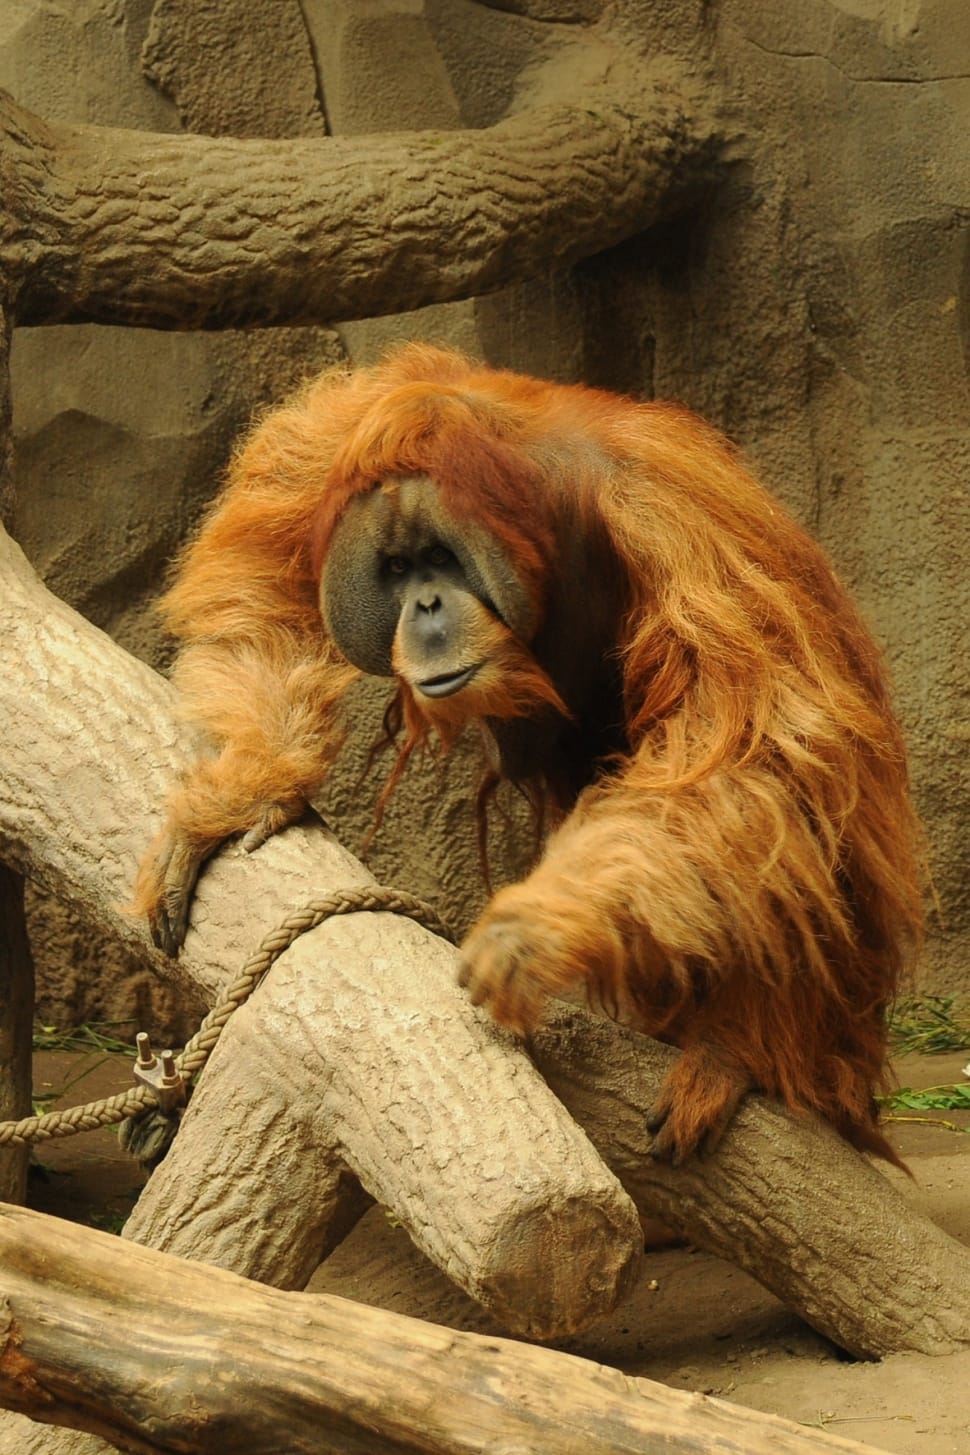 orangutan perching on grey concrete brunch inside the cage preview